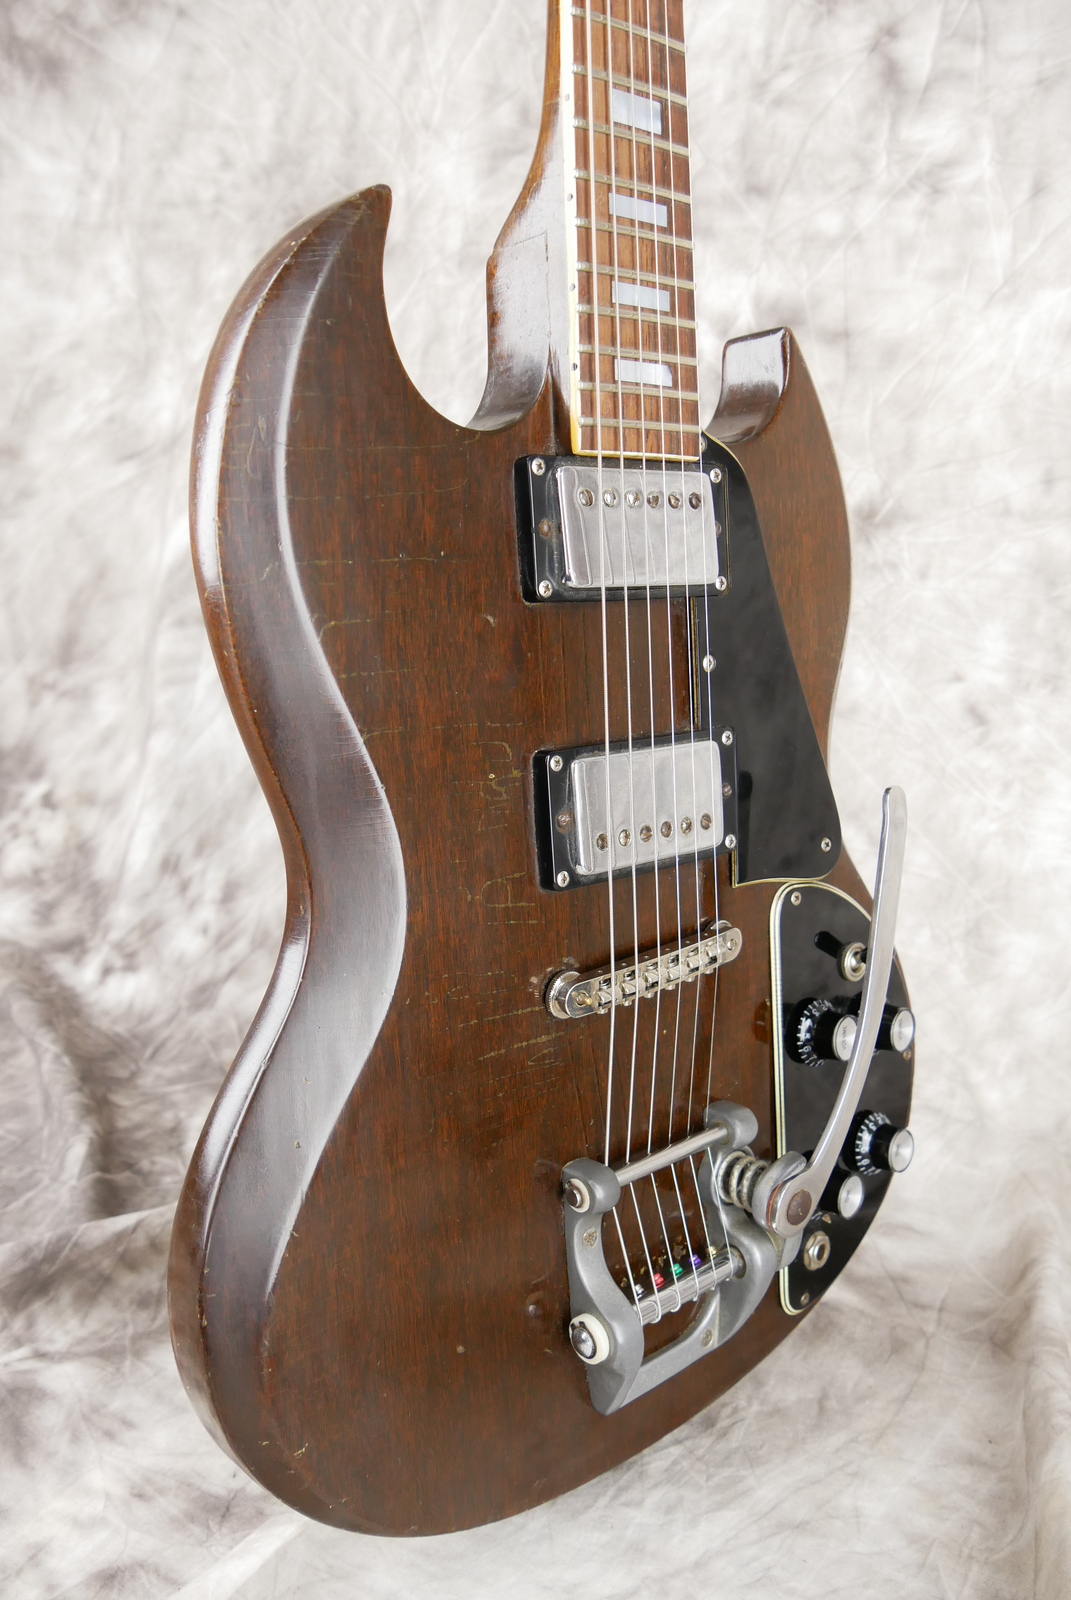 Gibson_SG_Deluxe_bigsby_1971_1972_walnut_cts-pots_1966-009.JPG